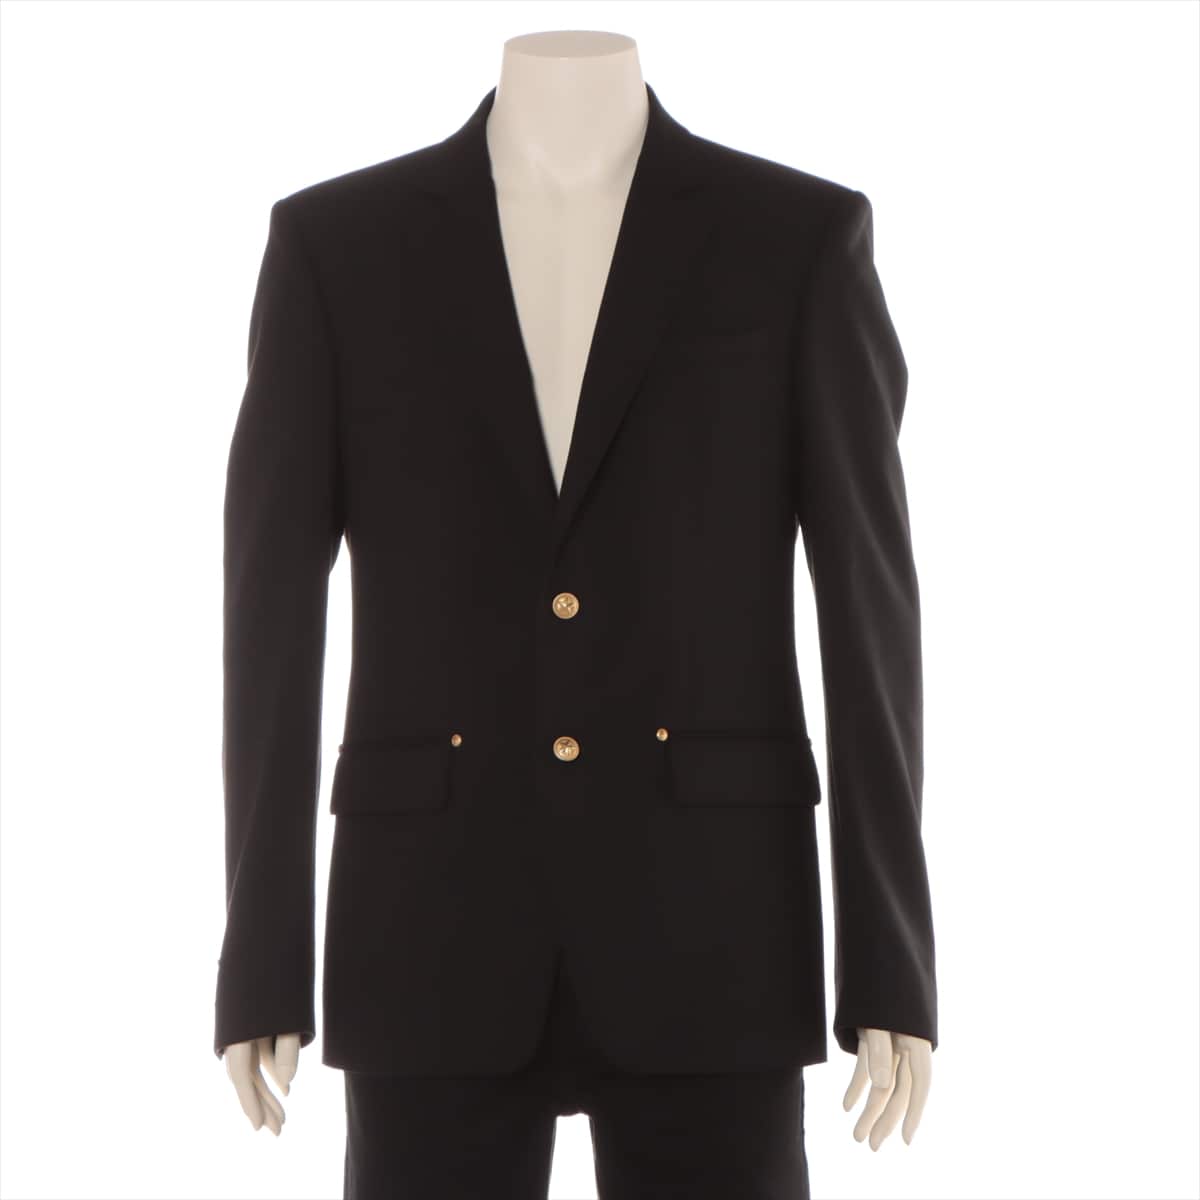 Givenchy Wool & Mohair Tailored jacket 50 Men's Black  Star button